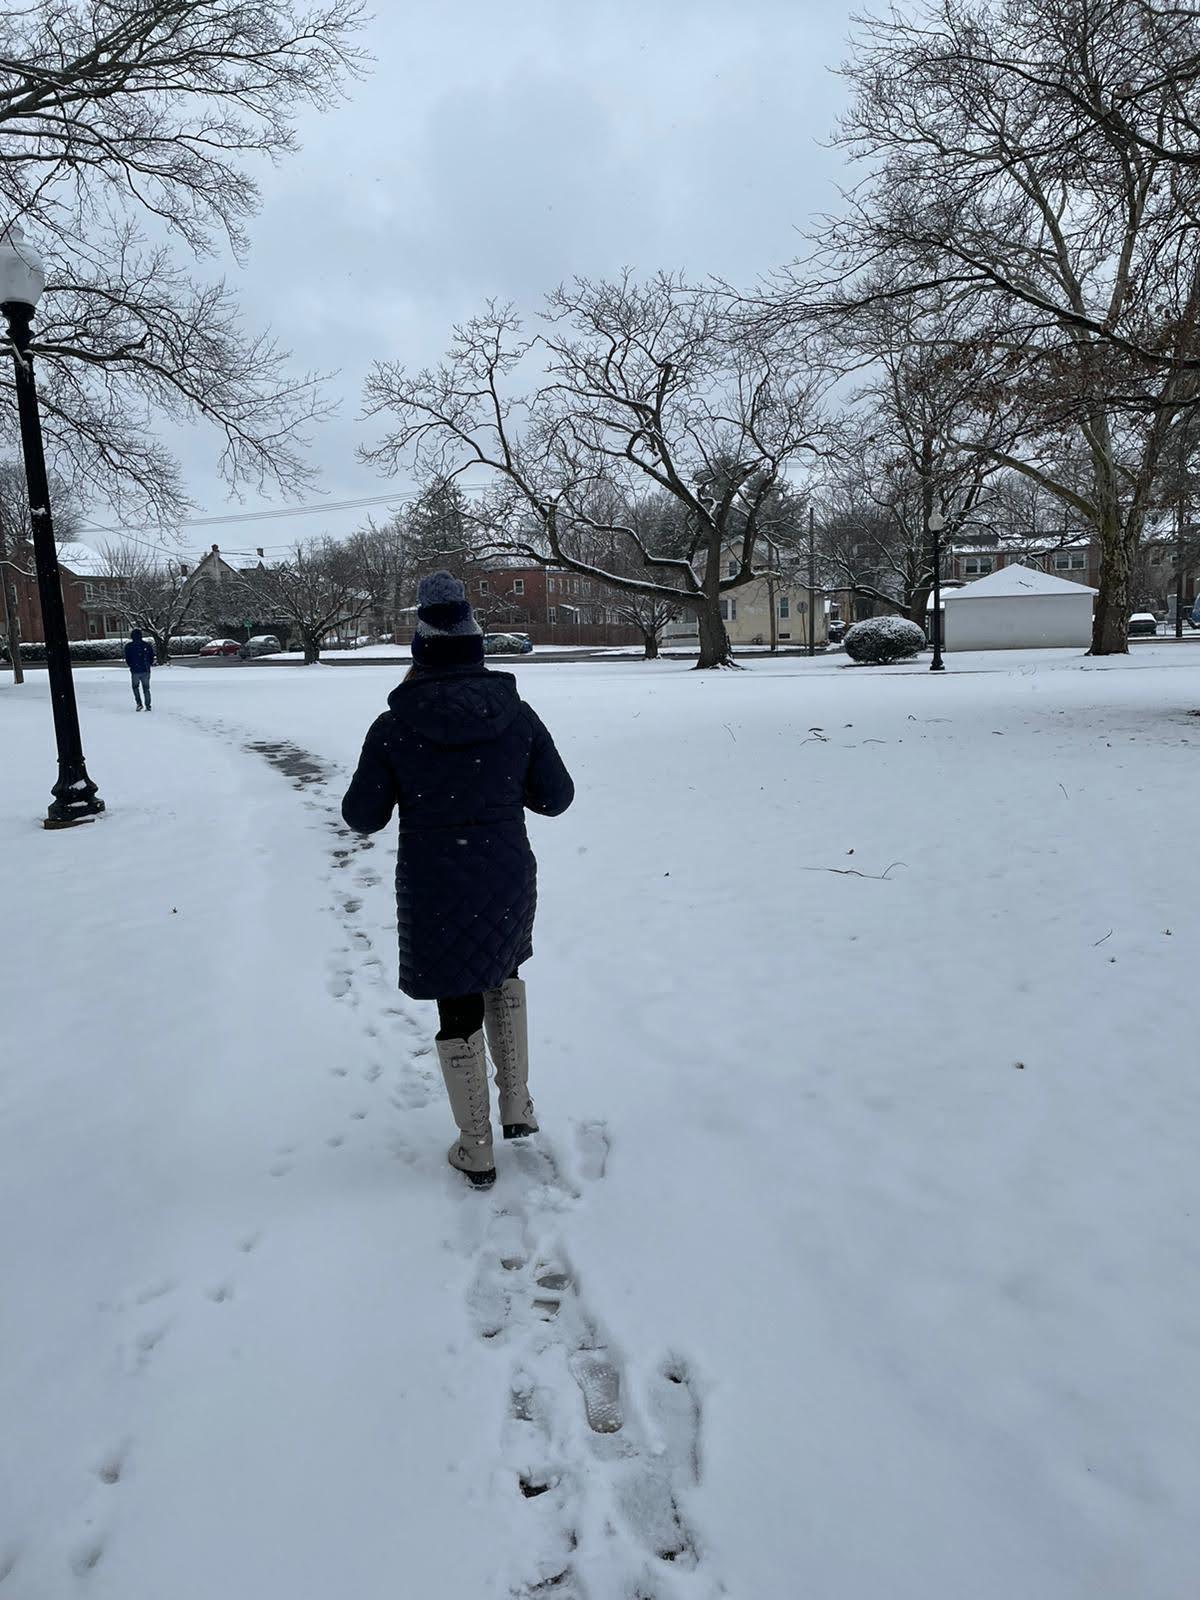 A person walking in the snow

Description automatically generated